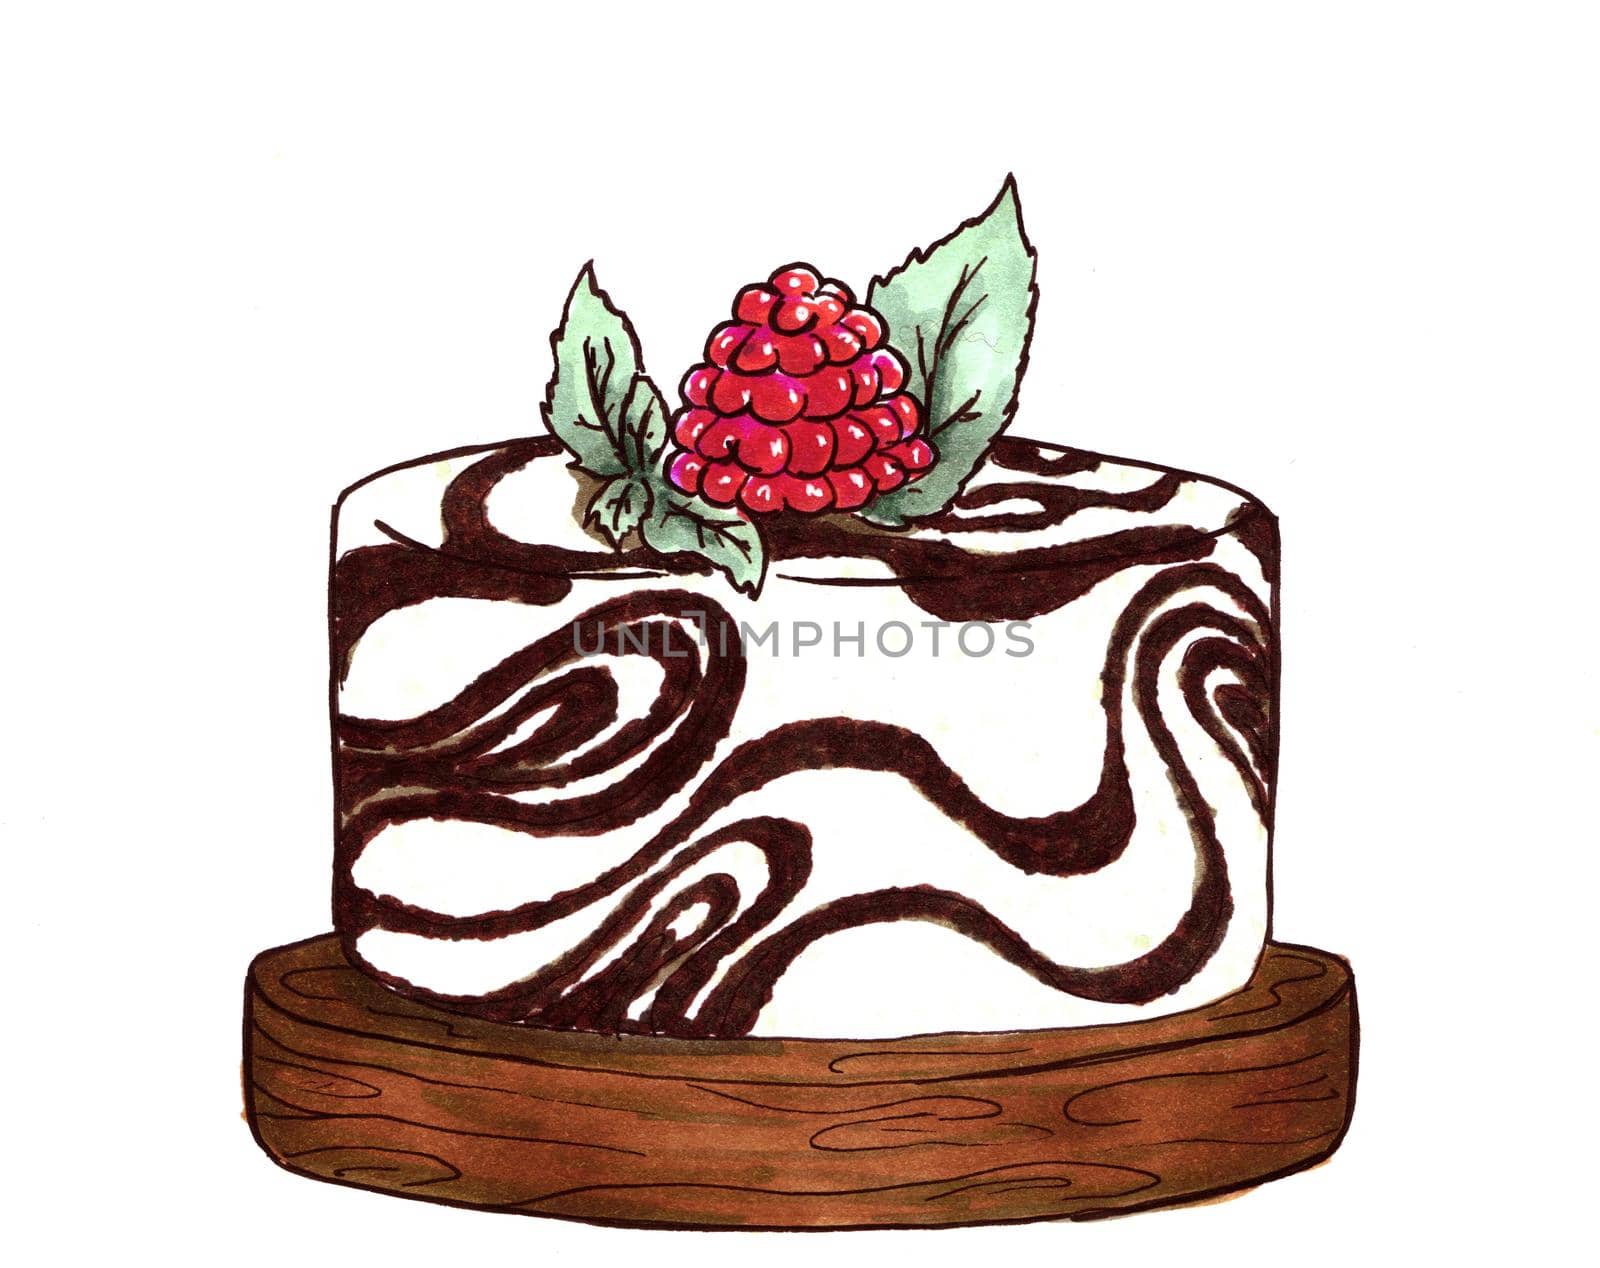 Marble white chokolate cheesecake with raspberries on a wooden stand. Hand drawn cupcake. Alcohol markers